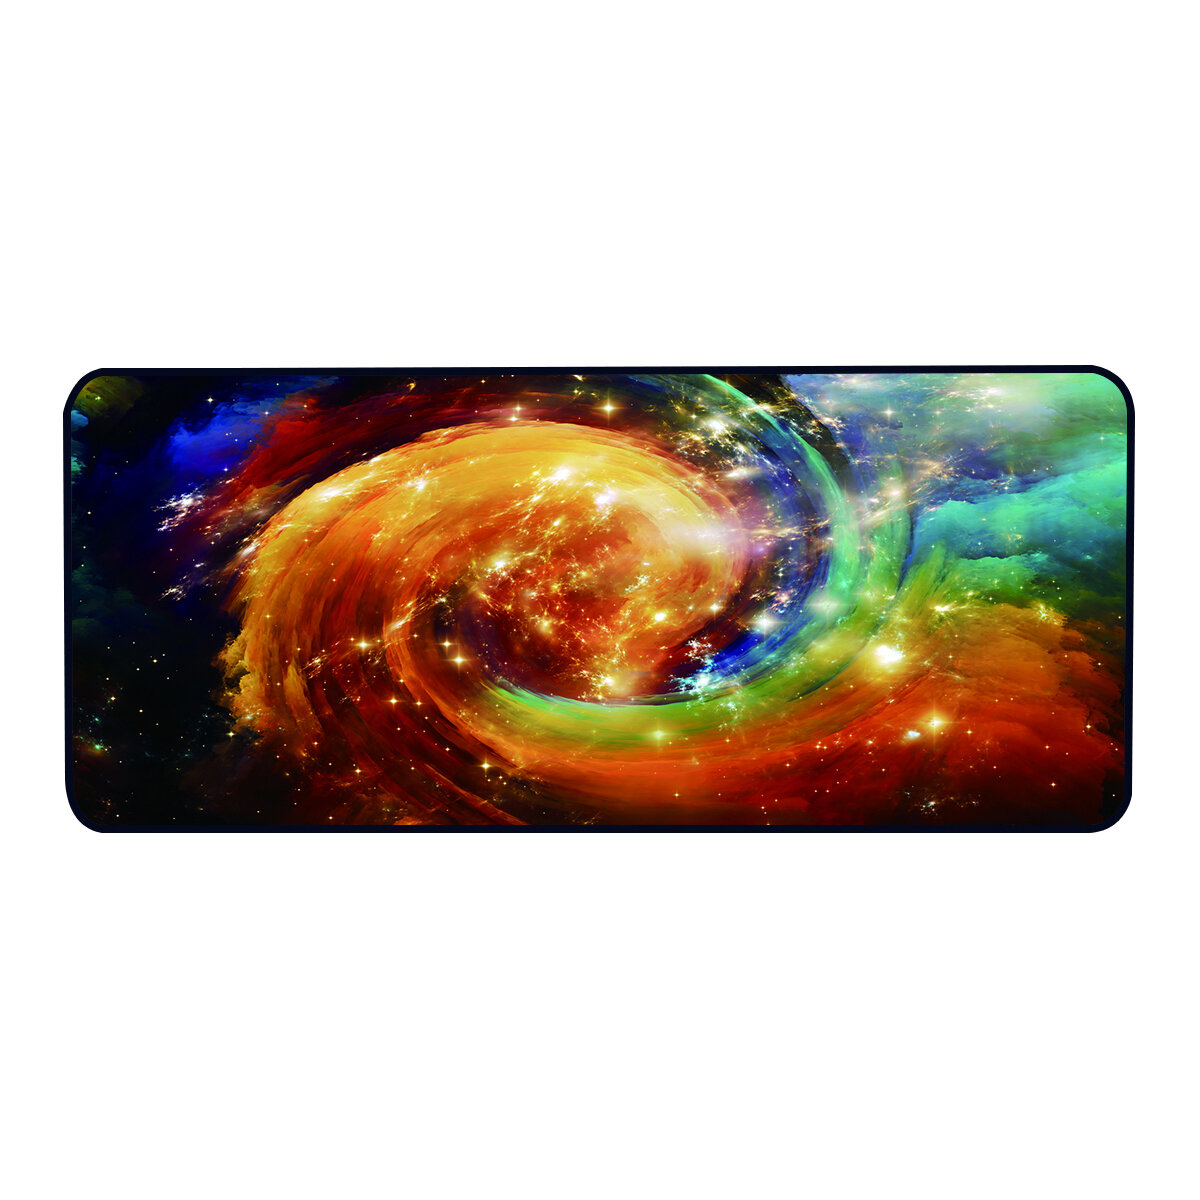 Extra Large Mouse Pad Whirlwind Pattern Soft Rubber Anti-slip Large Gaming Keyboard Pad Desktop Protective Mat for Home